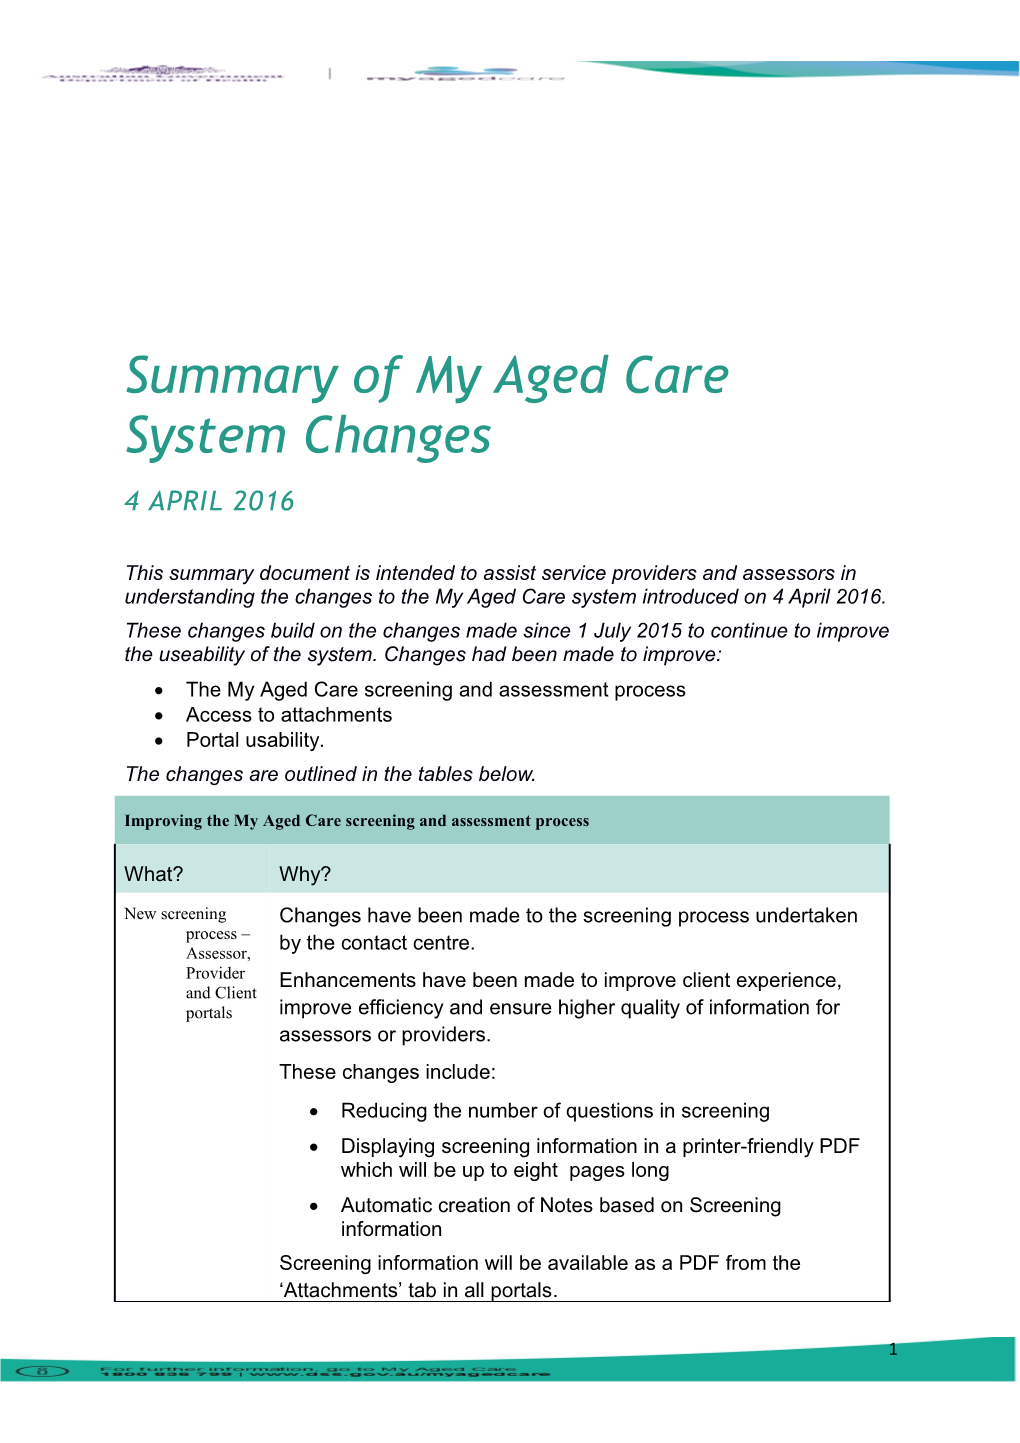 Summary of My Aged Care System Changes